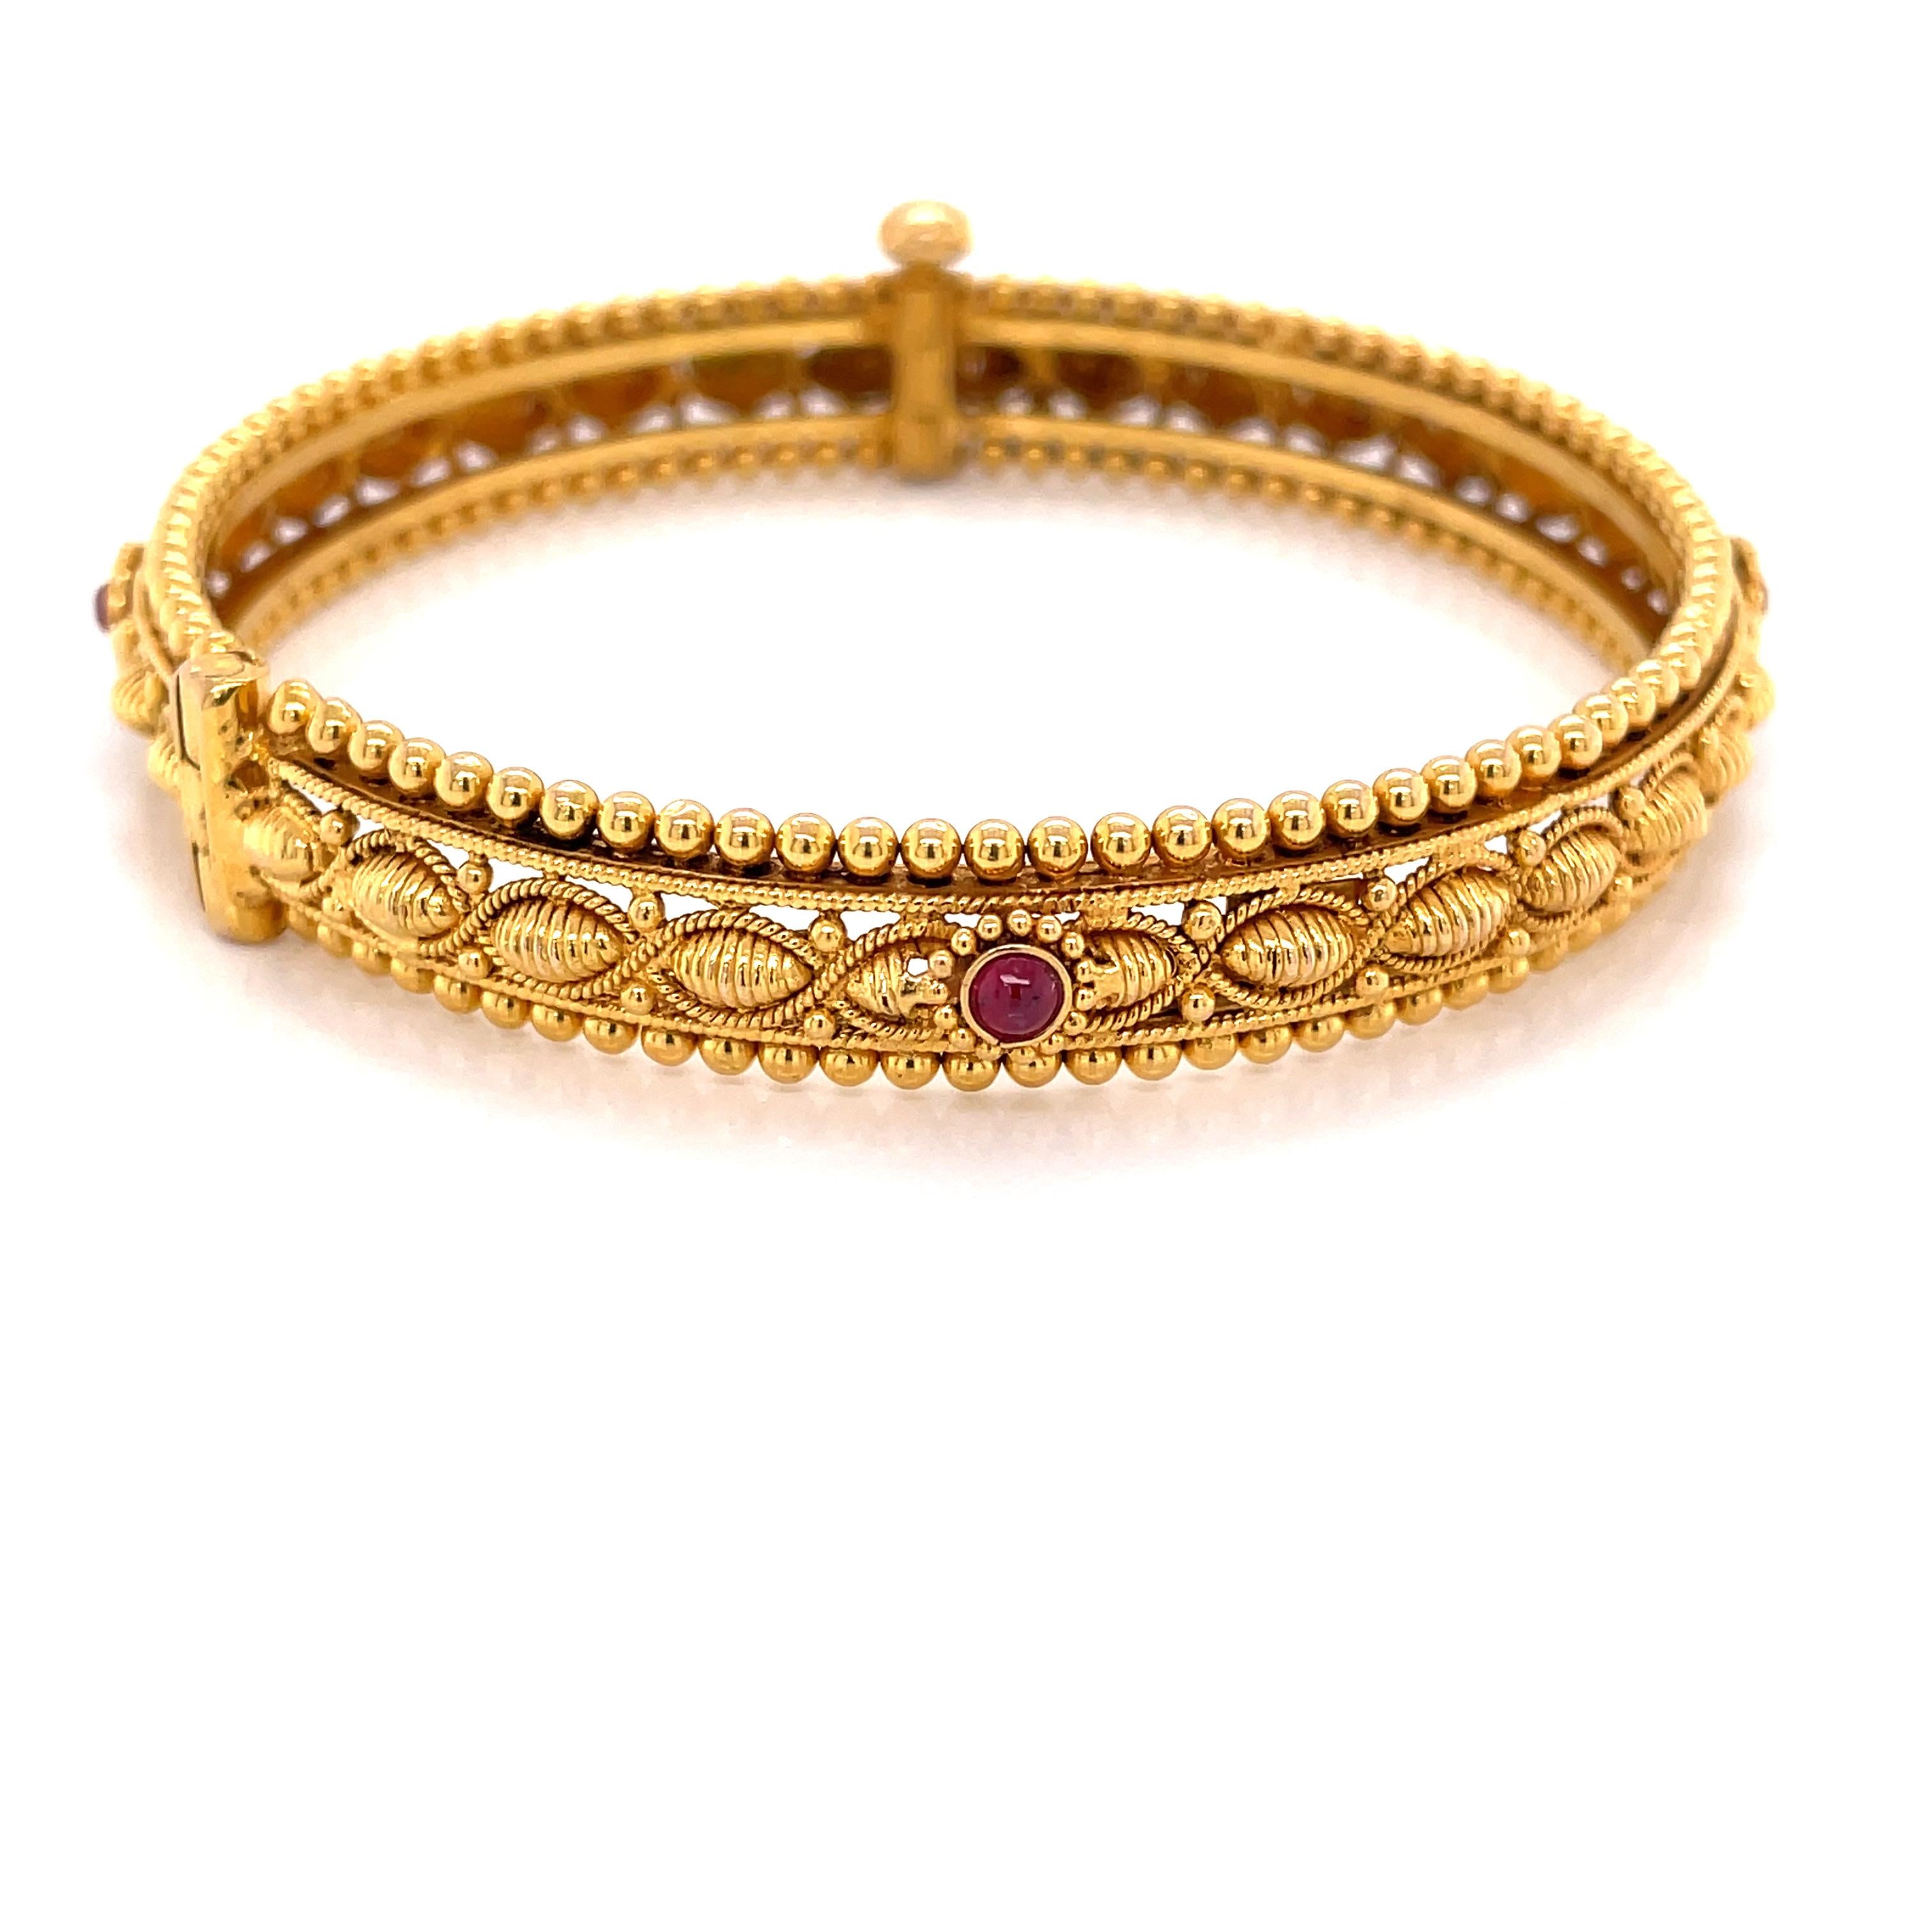 Elegant, in eighteen karat 18 karat yellow, artful gold filigree framed with delicate beads of gold create this stunning bangle bracelet. This fine piece presents four colorful natural cabochon ruby accents that are set along the inner ribbon of